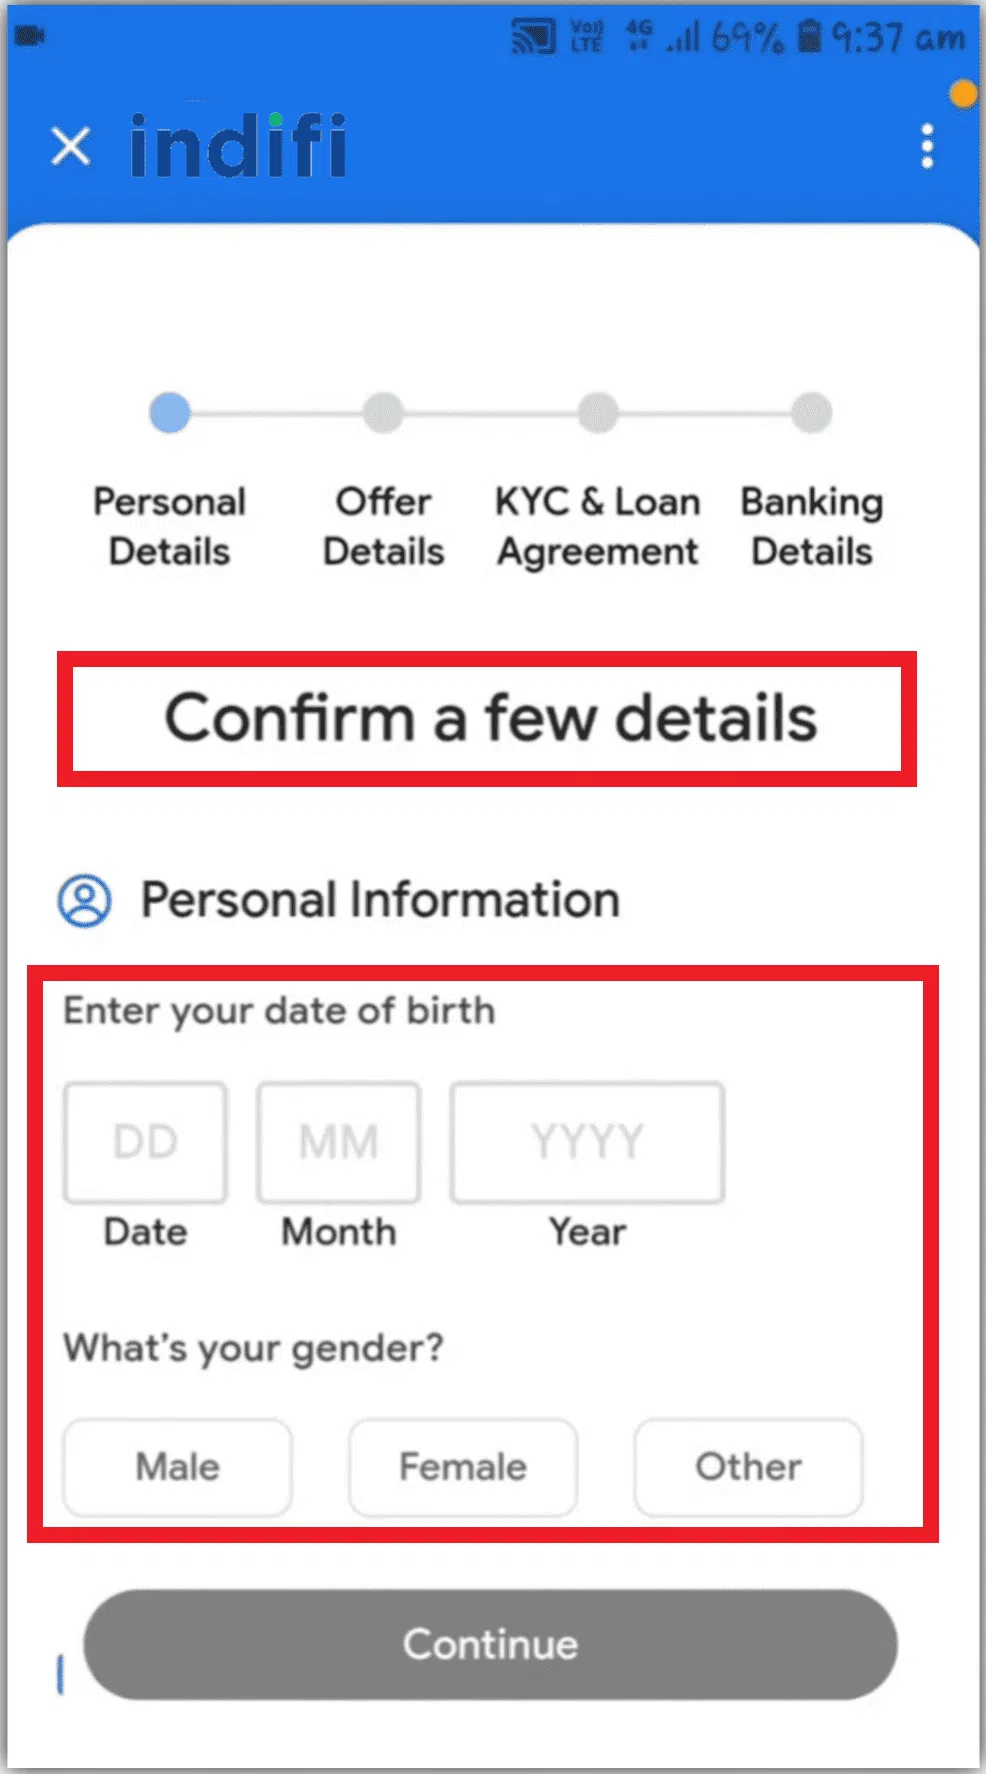 6 enter your personal details name gender date of birth etc